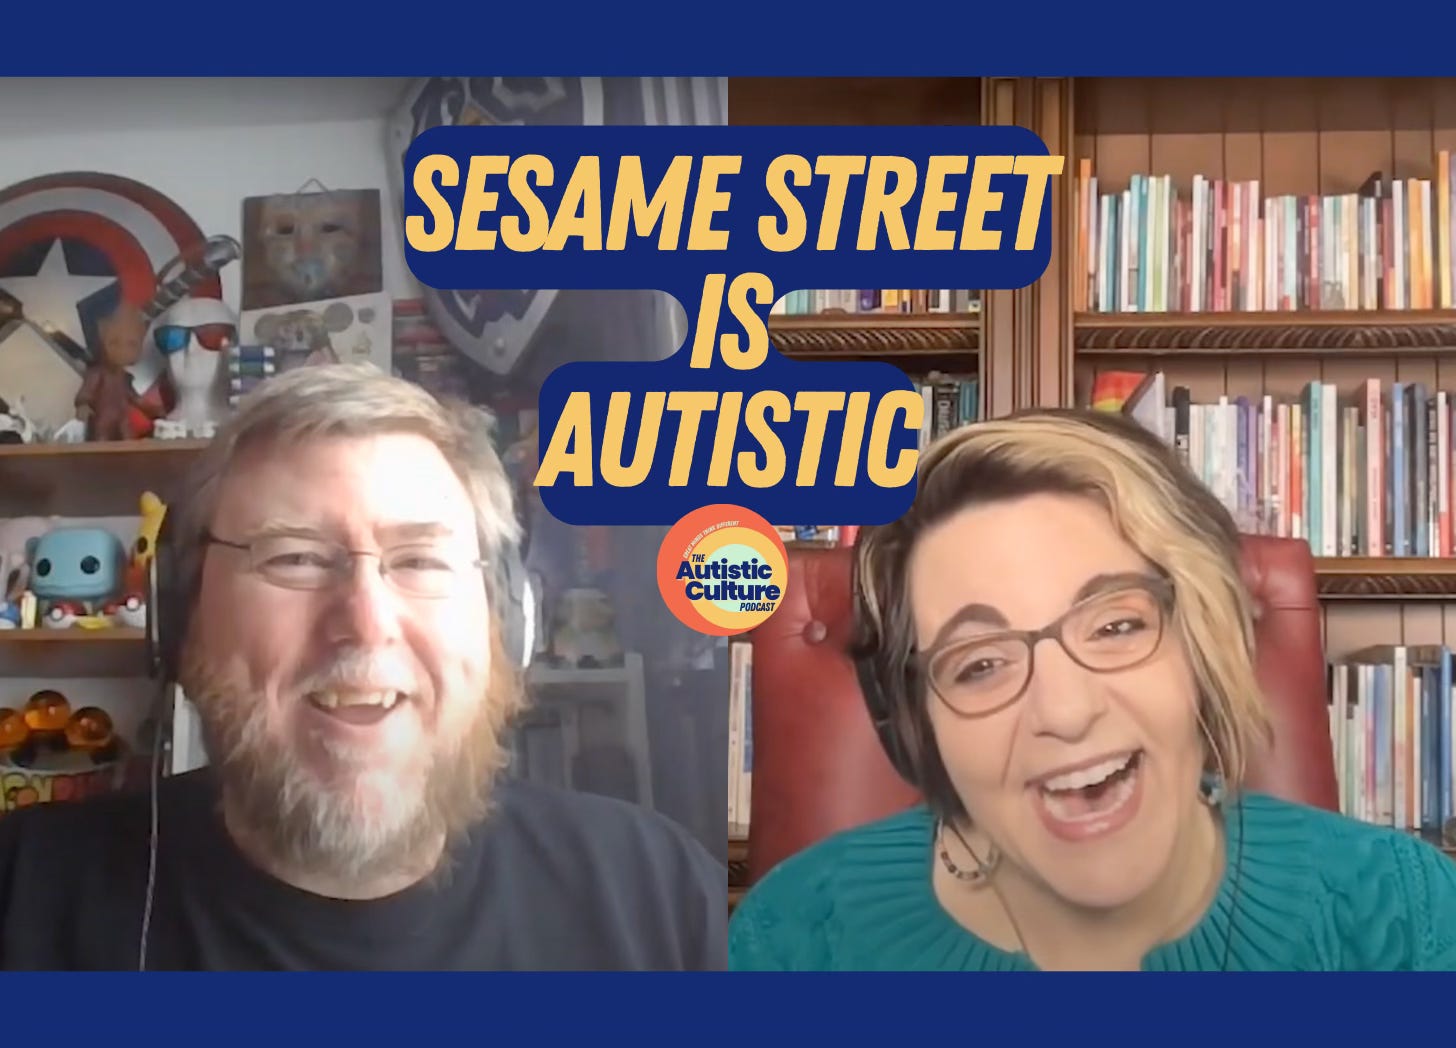 Matt Lowry and Angela Lauria are recording a podcast episode. Listen to Autistic podcast hosts discuss: Sesame Street Is Autistic. Autism podcast | Sesame Street embraces diversity by design. Did they get it right with Julia? Matt and Angela discuss the show's Autistic origins and the newest "Autistic" character.